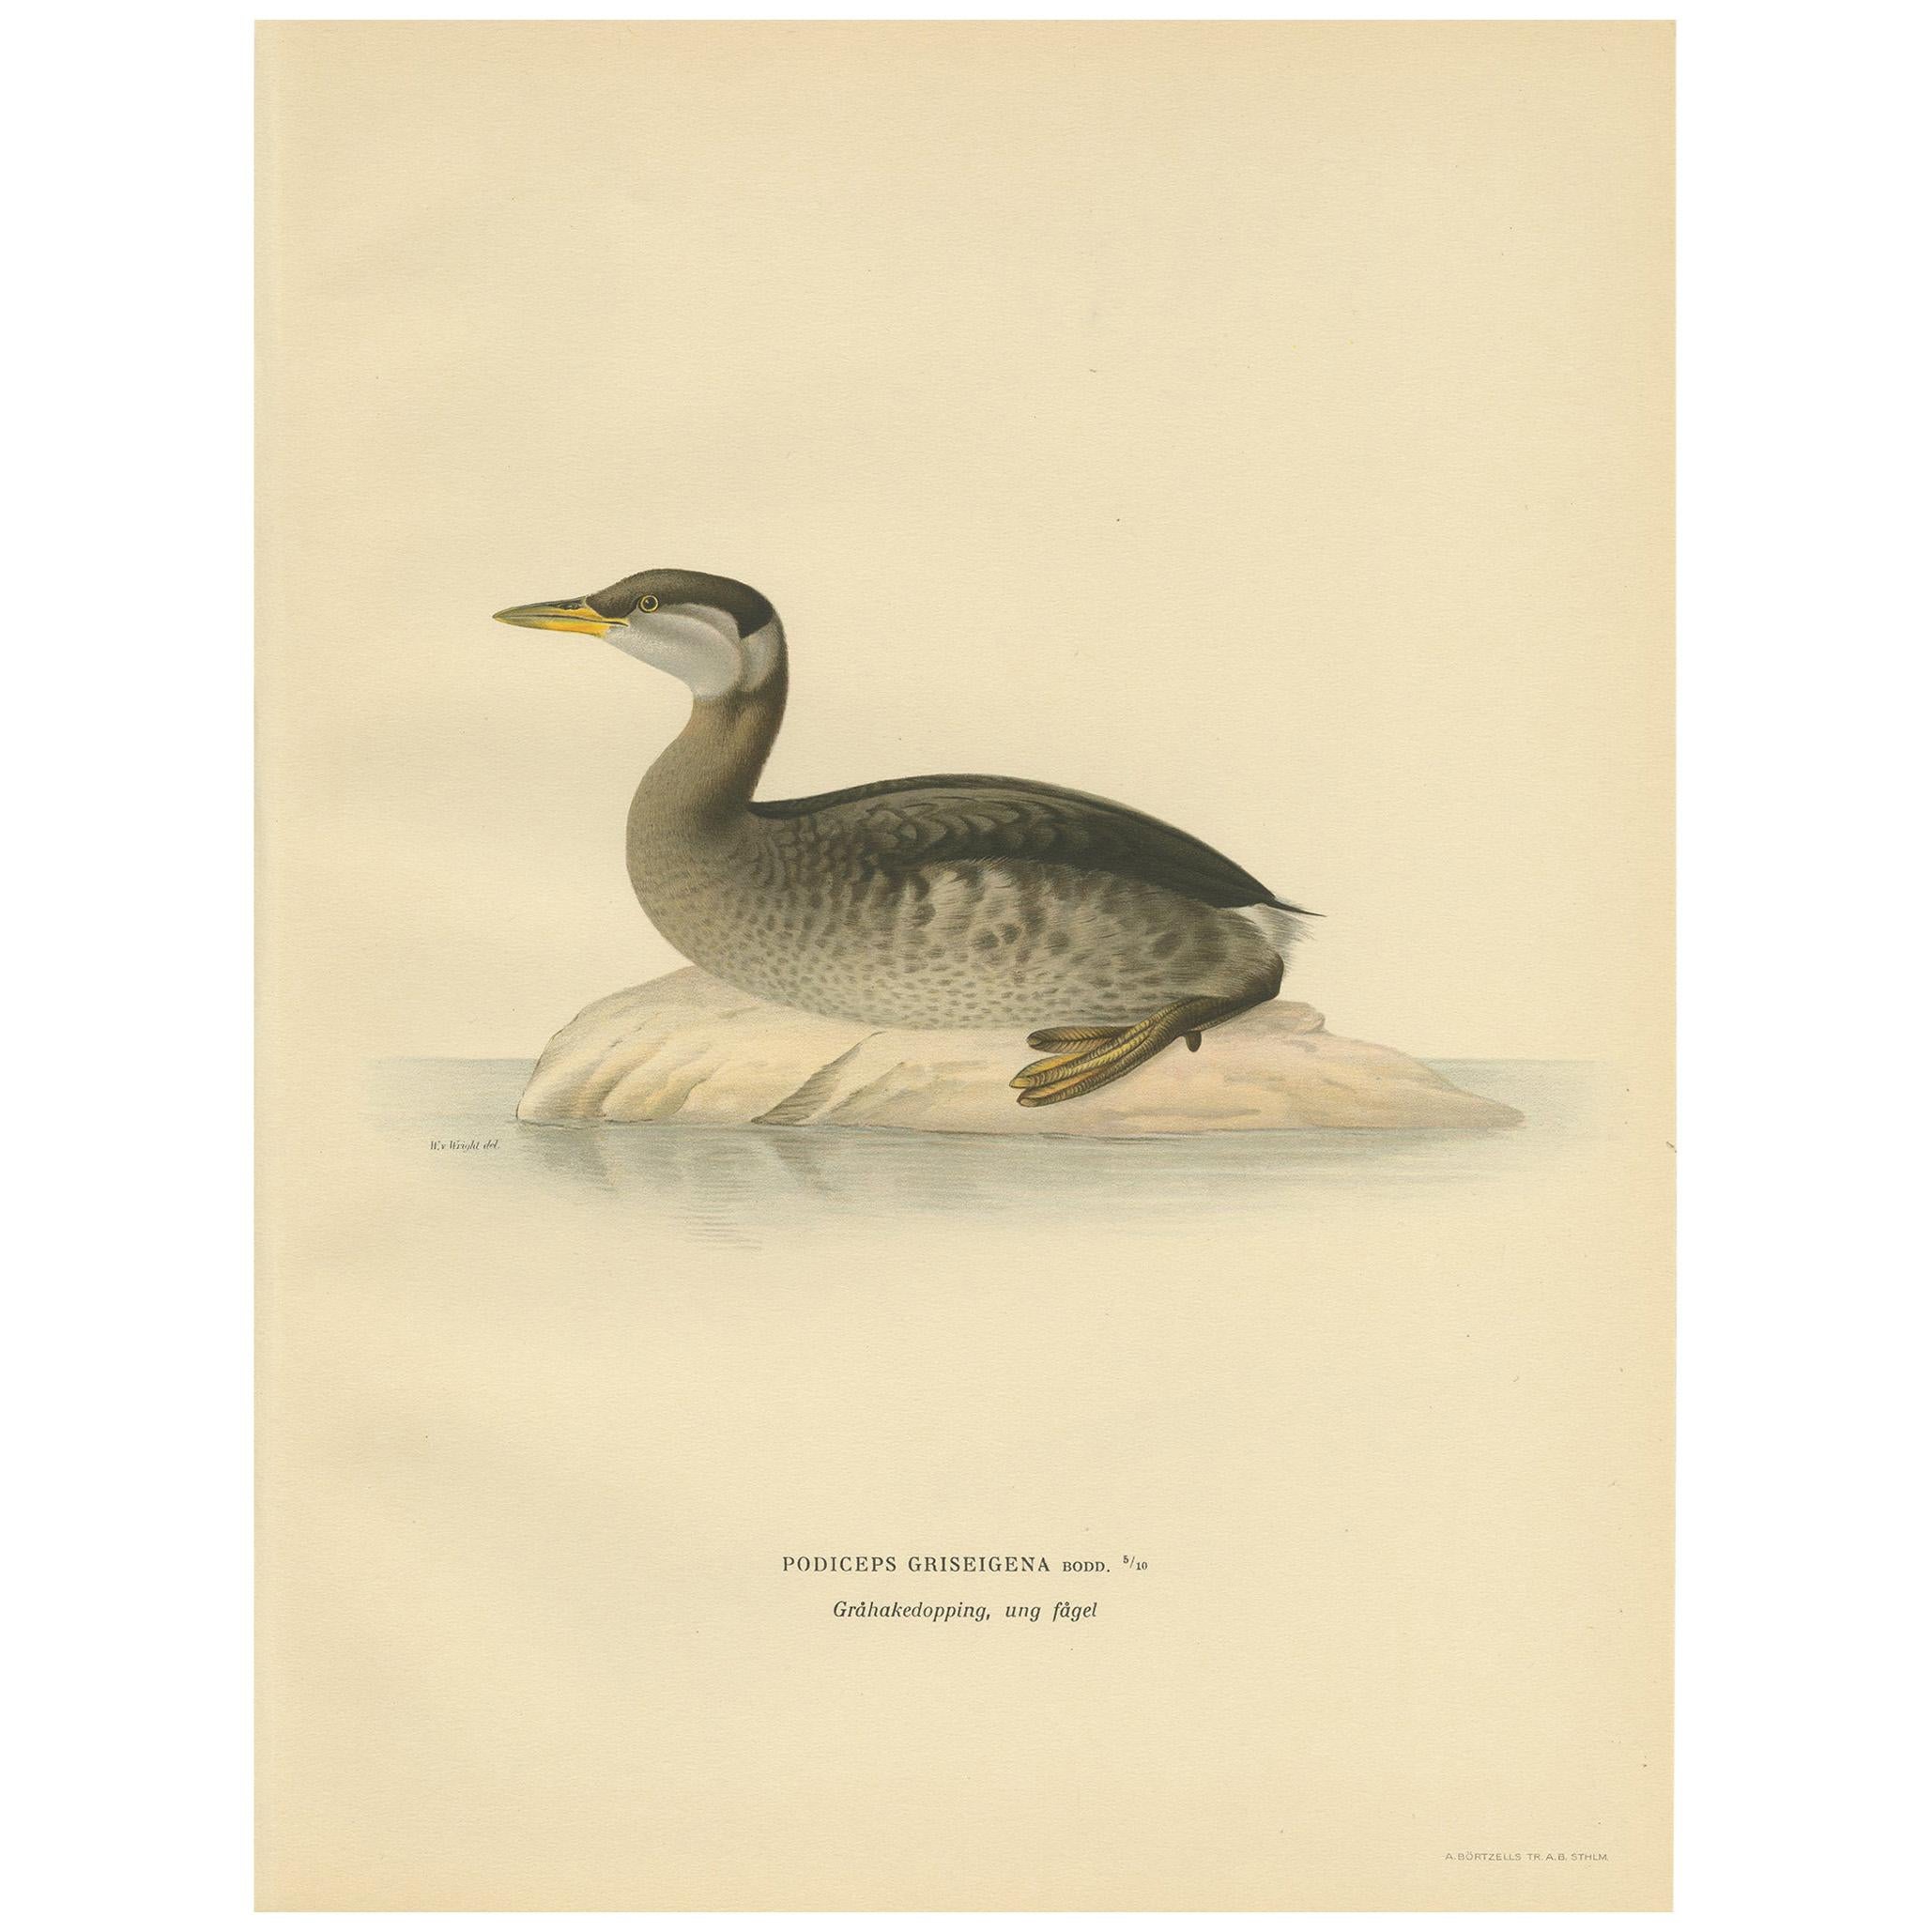 Antique Bird Print of a Young Red-Necked Grebe by Von Wright, 1929